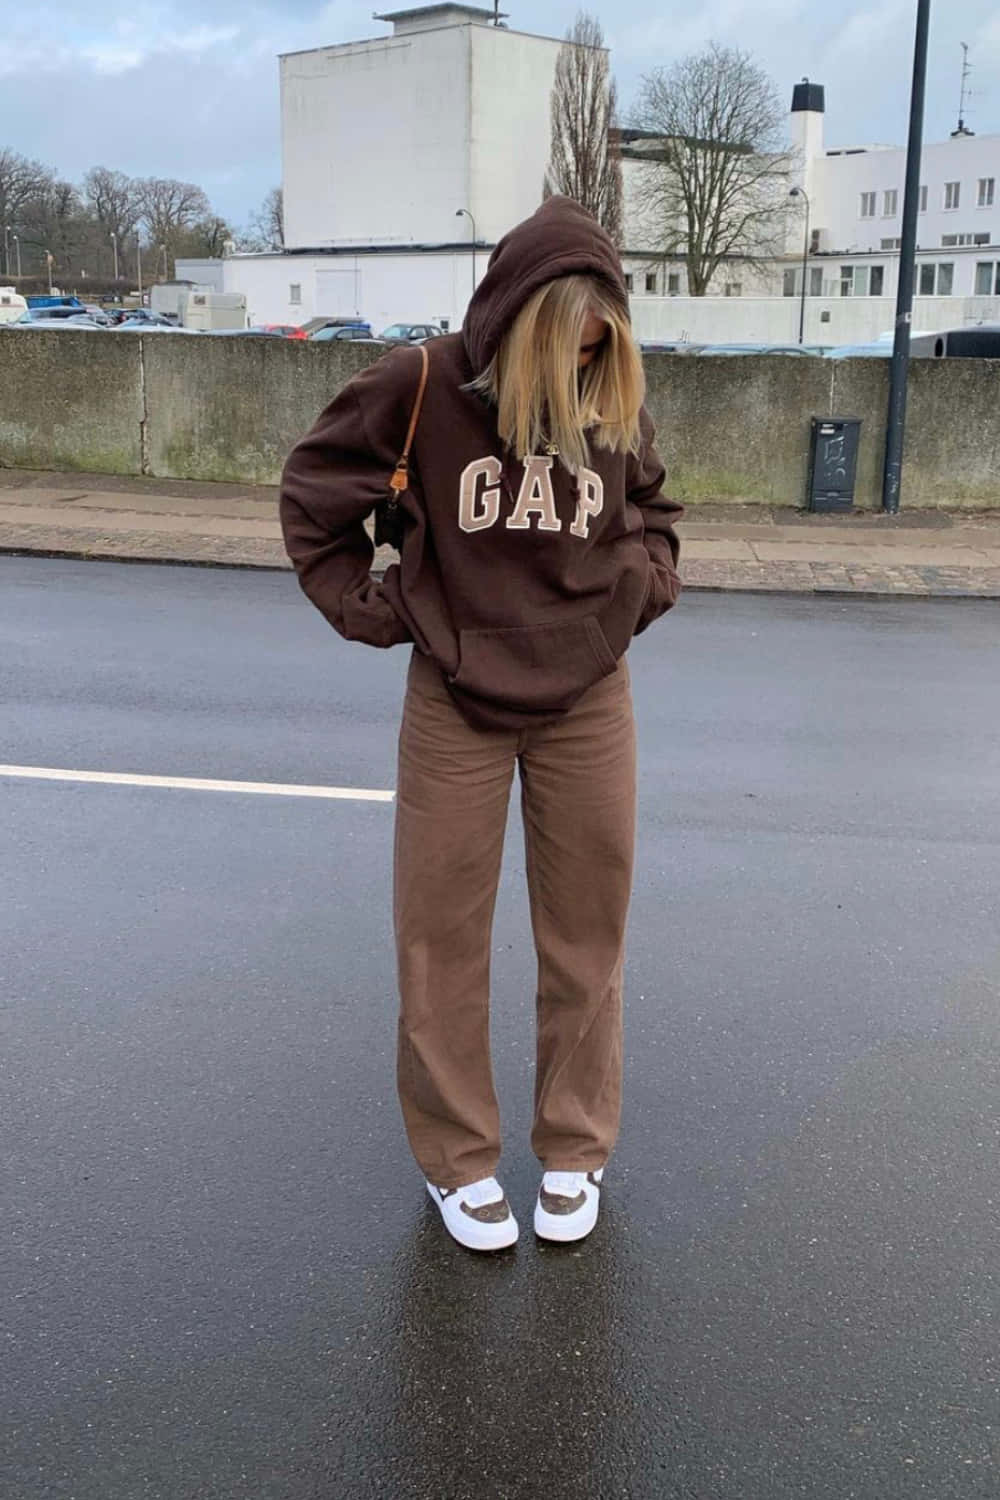 Download A Woman In Brown Sweat Pants And A Gap Hoodie